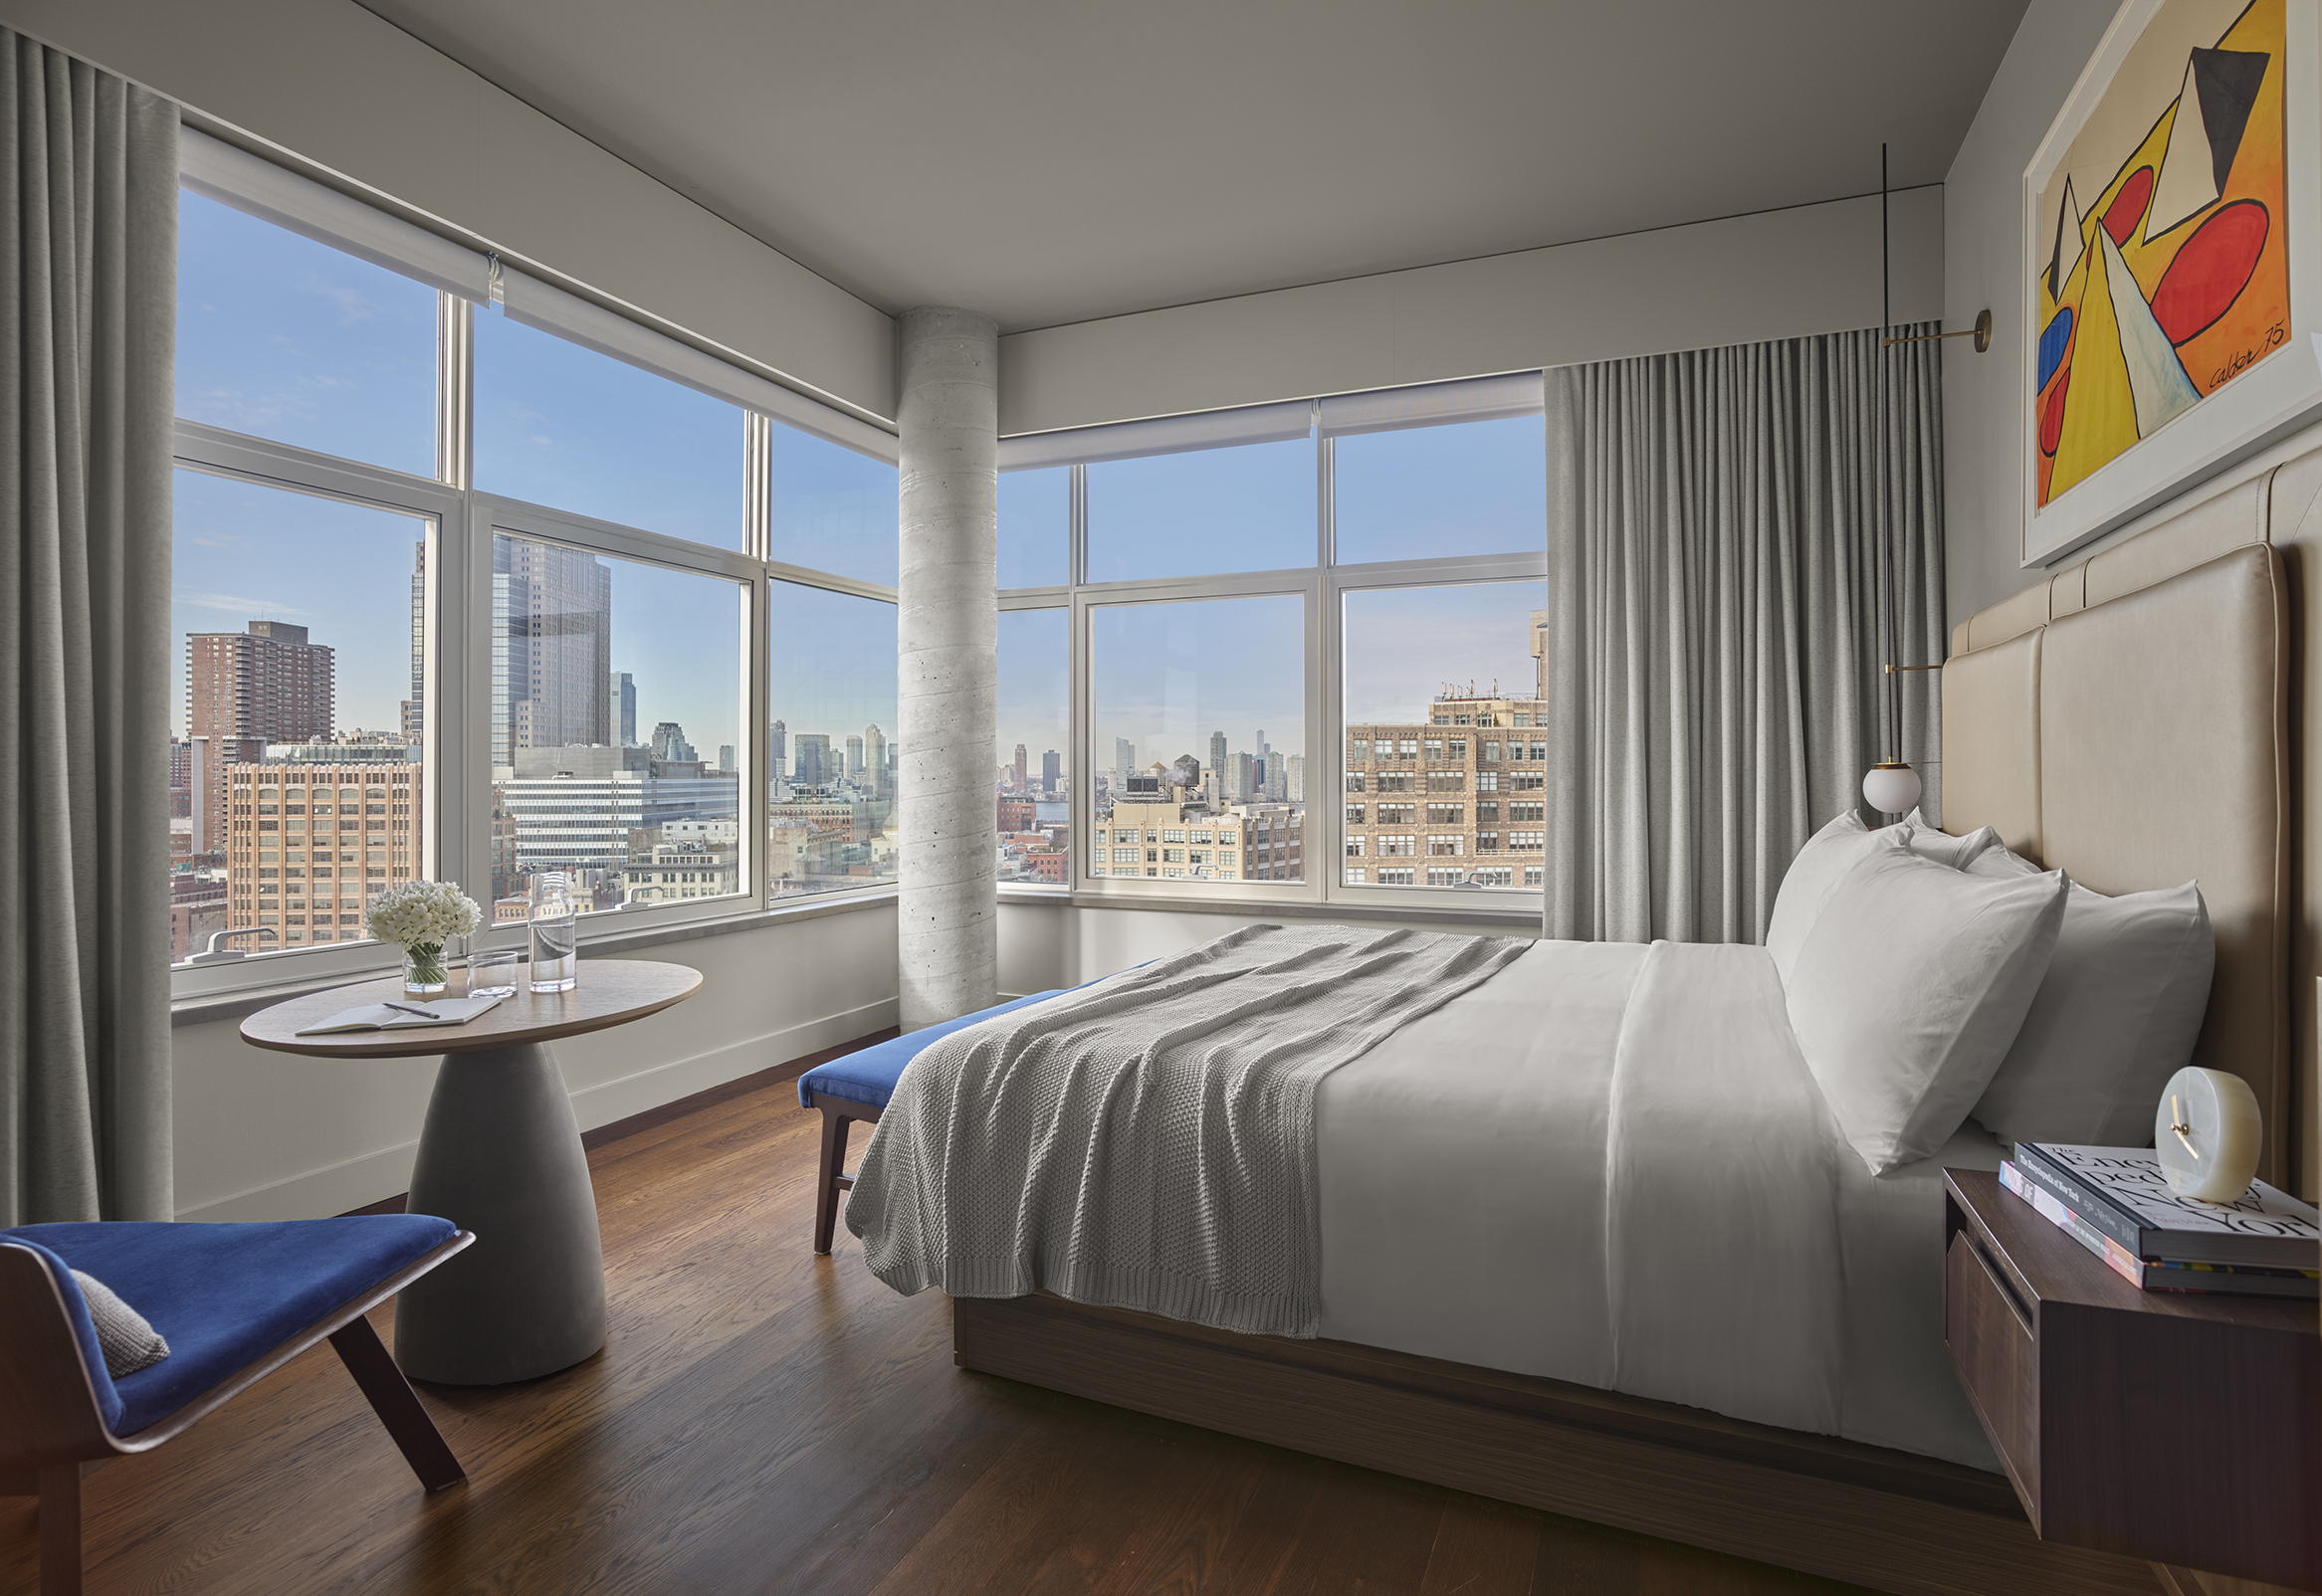 A Skyline King studio at the ModernHaus hotel in Soho, Manhatatn with king size bed, breakfast table and views of lower manhattan